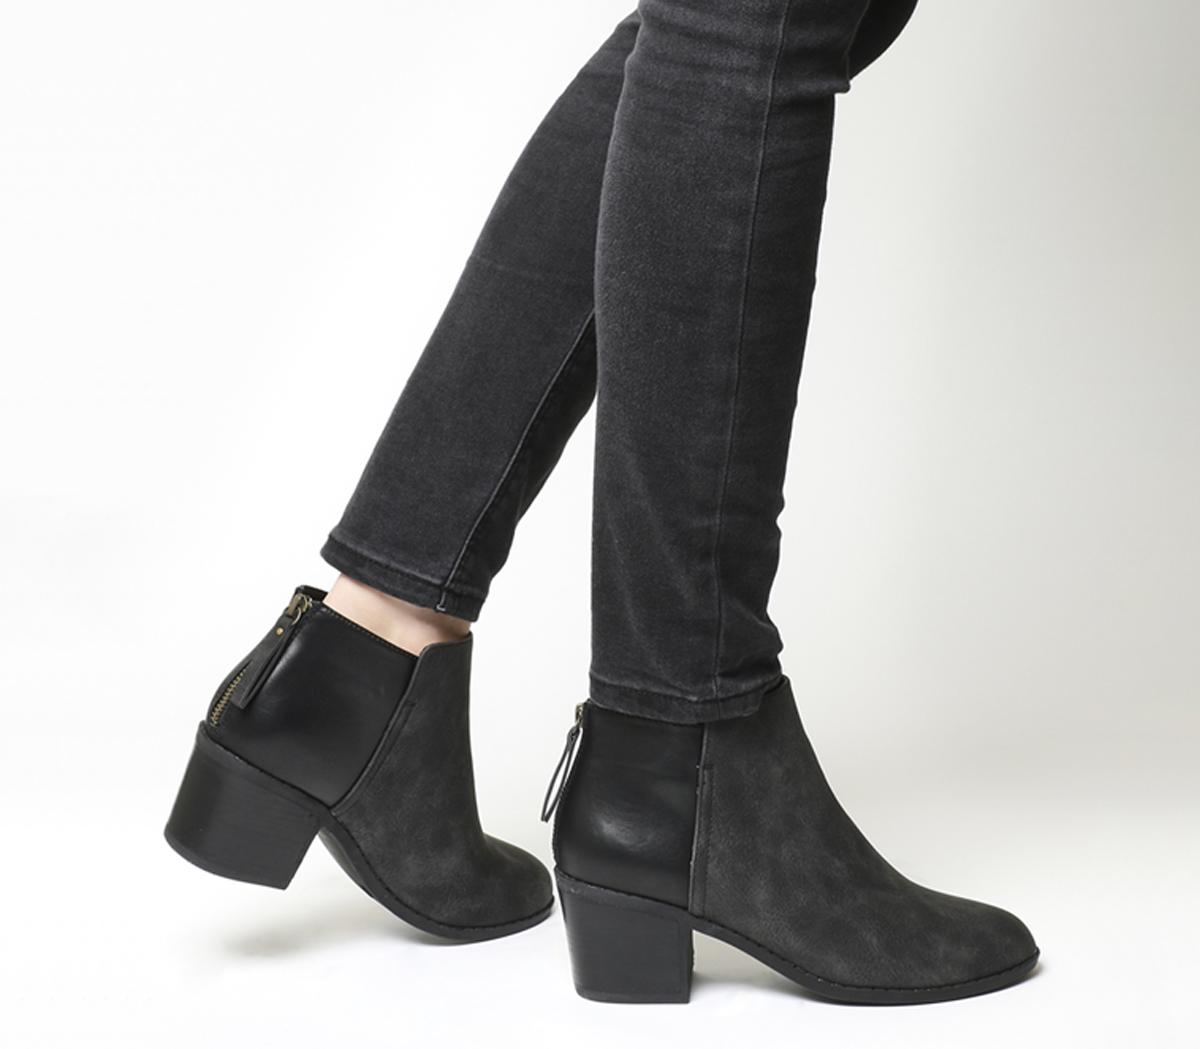 black boots with zipper up the back